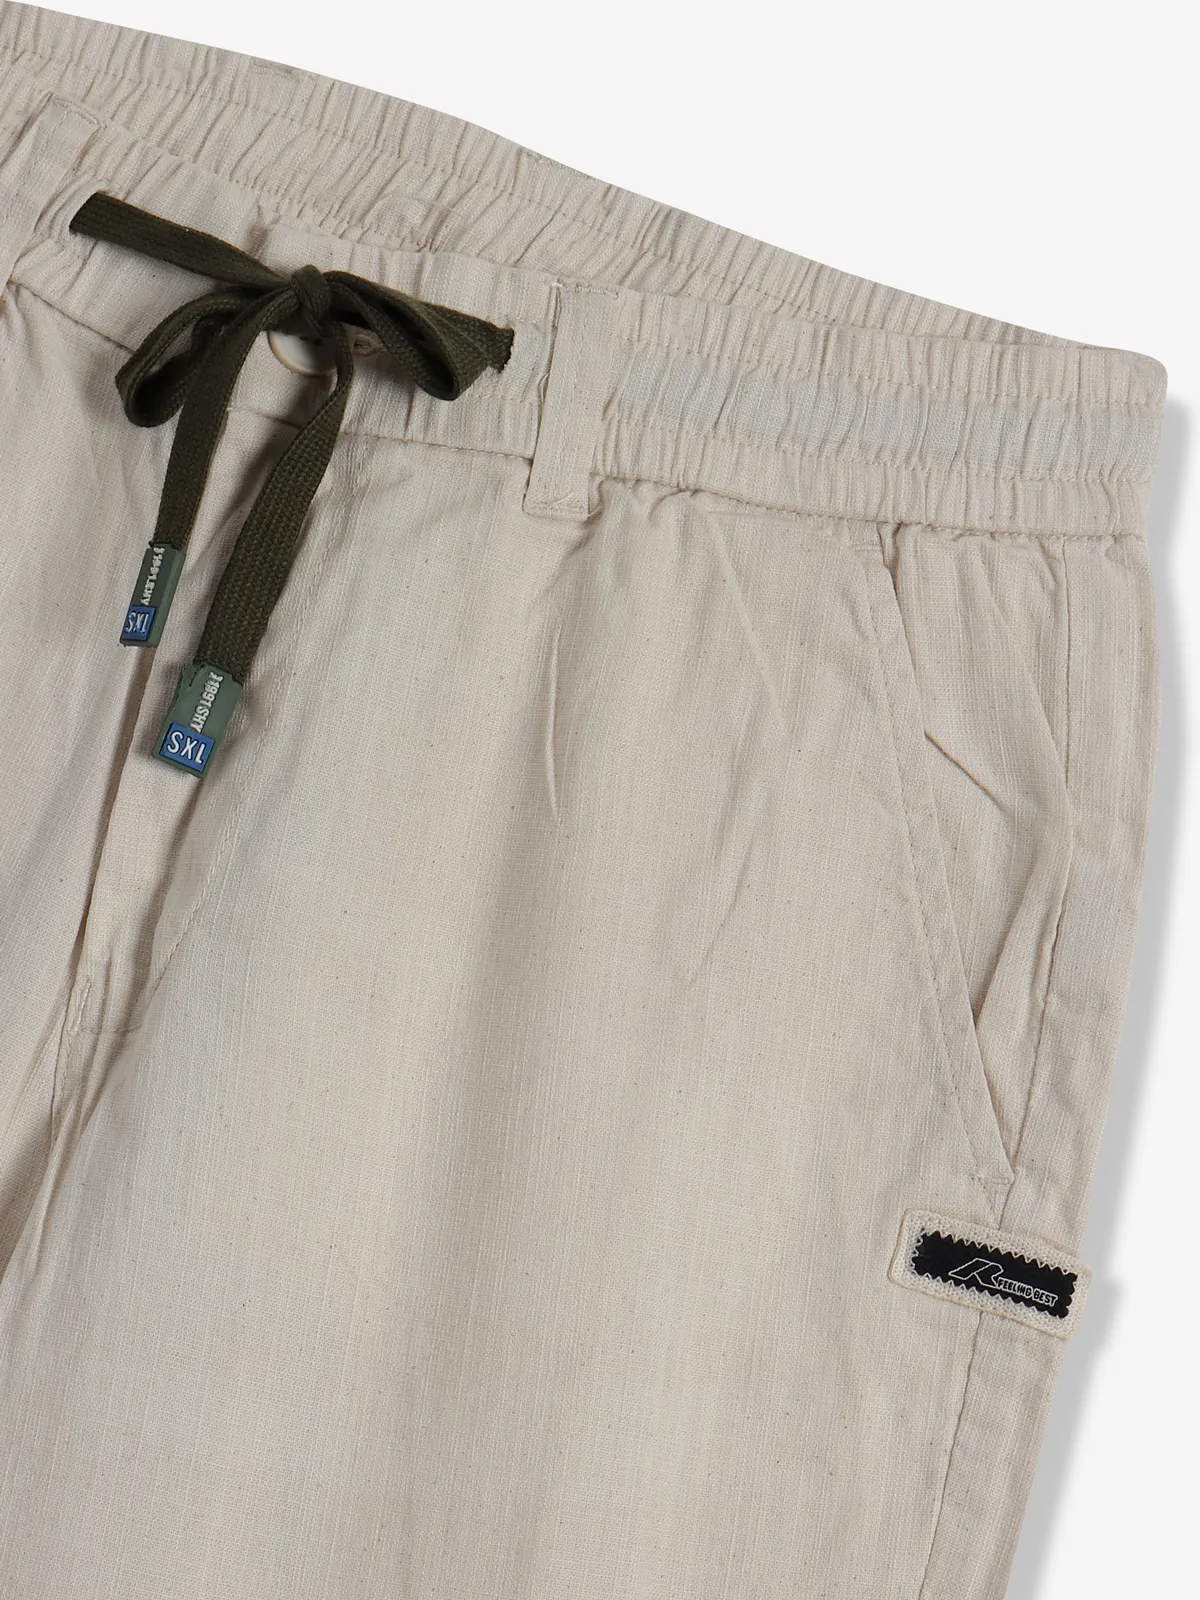 GS78 solid cream cotton track pant